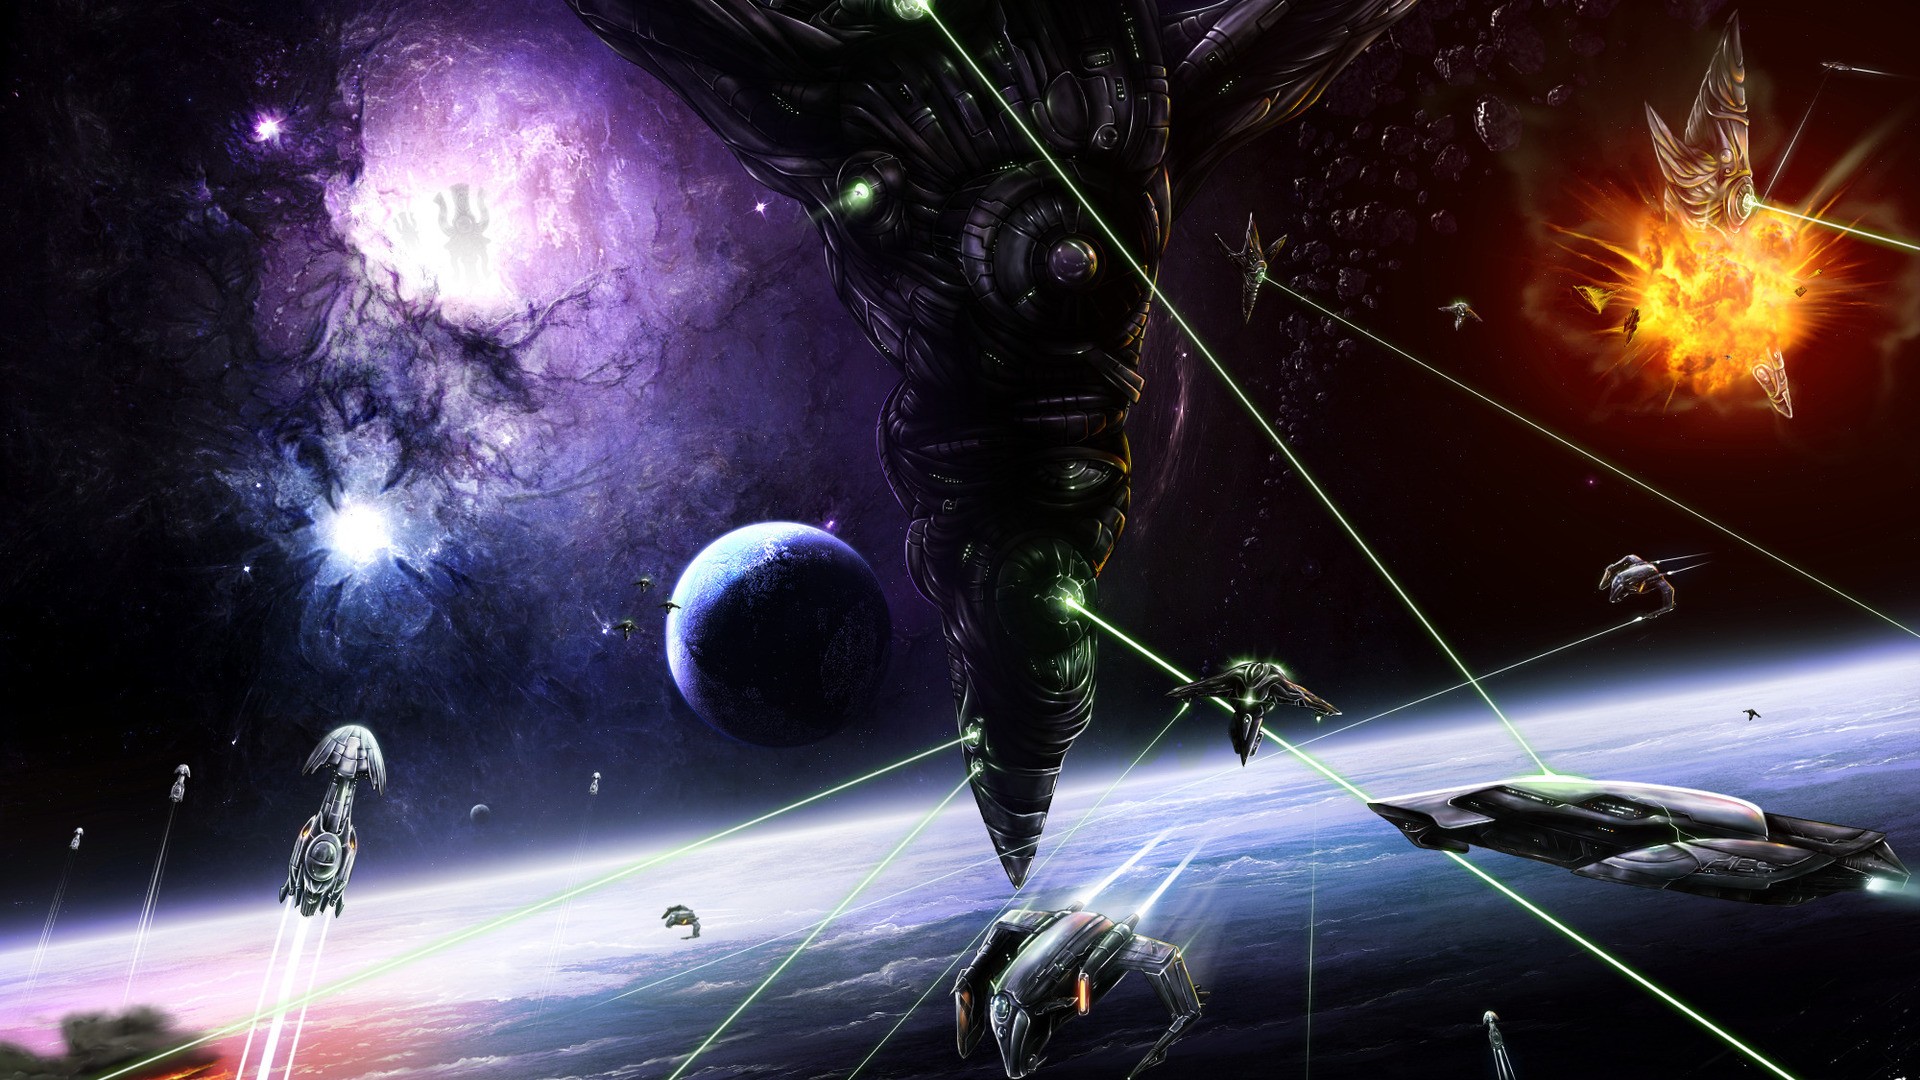 Outer Space Station Battles Wallpaper